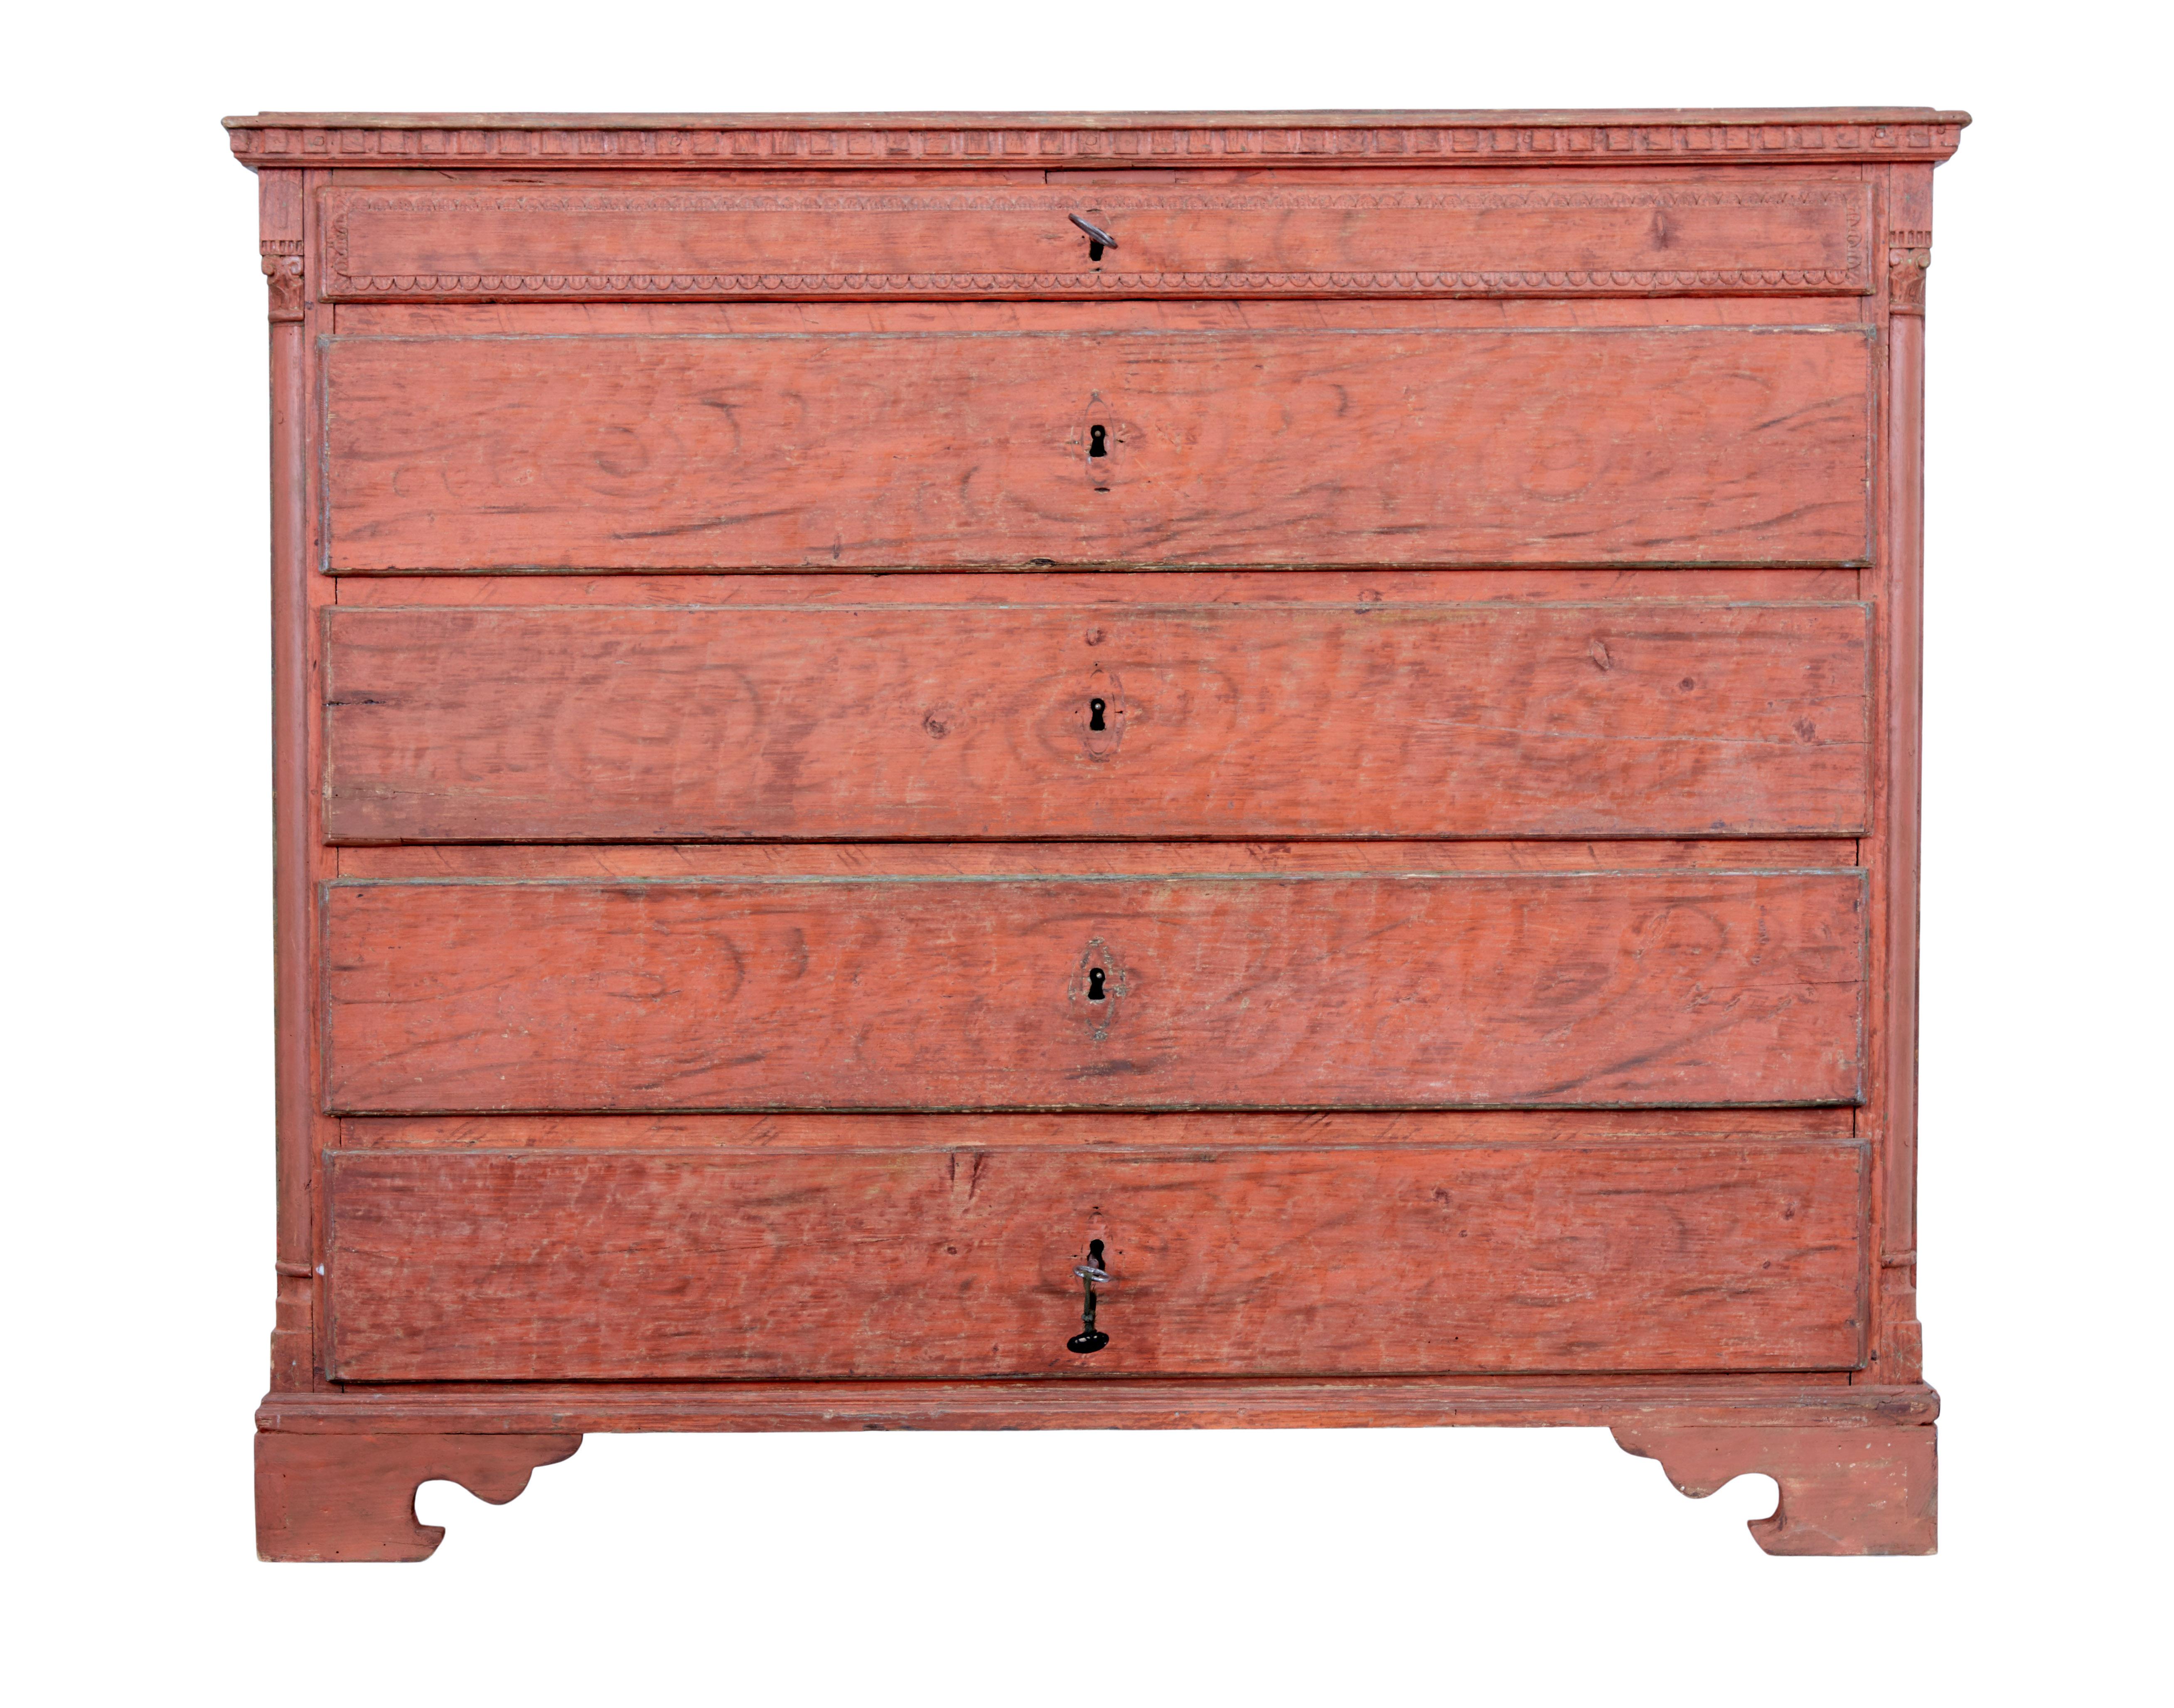 Late 18th century Swedish Gustavian painted chest of drawers, circa 1790.

Fine quality oak and pine Gustavian period commode, with scraped back paint.

5 drawer chest with a small drawer just below the top surface and 4 more of equal size. 1